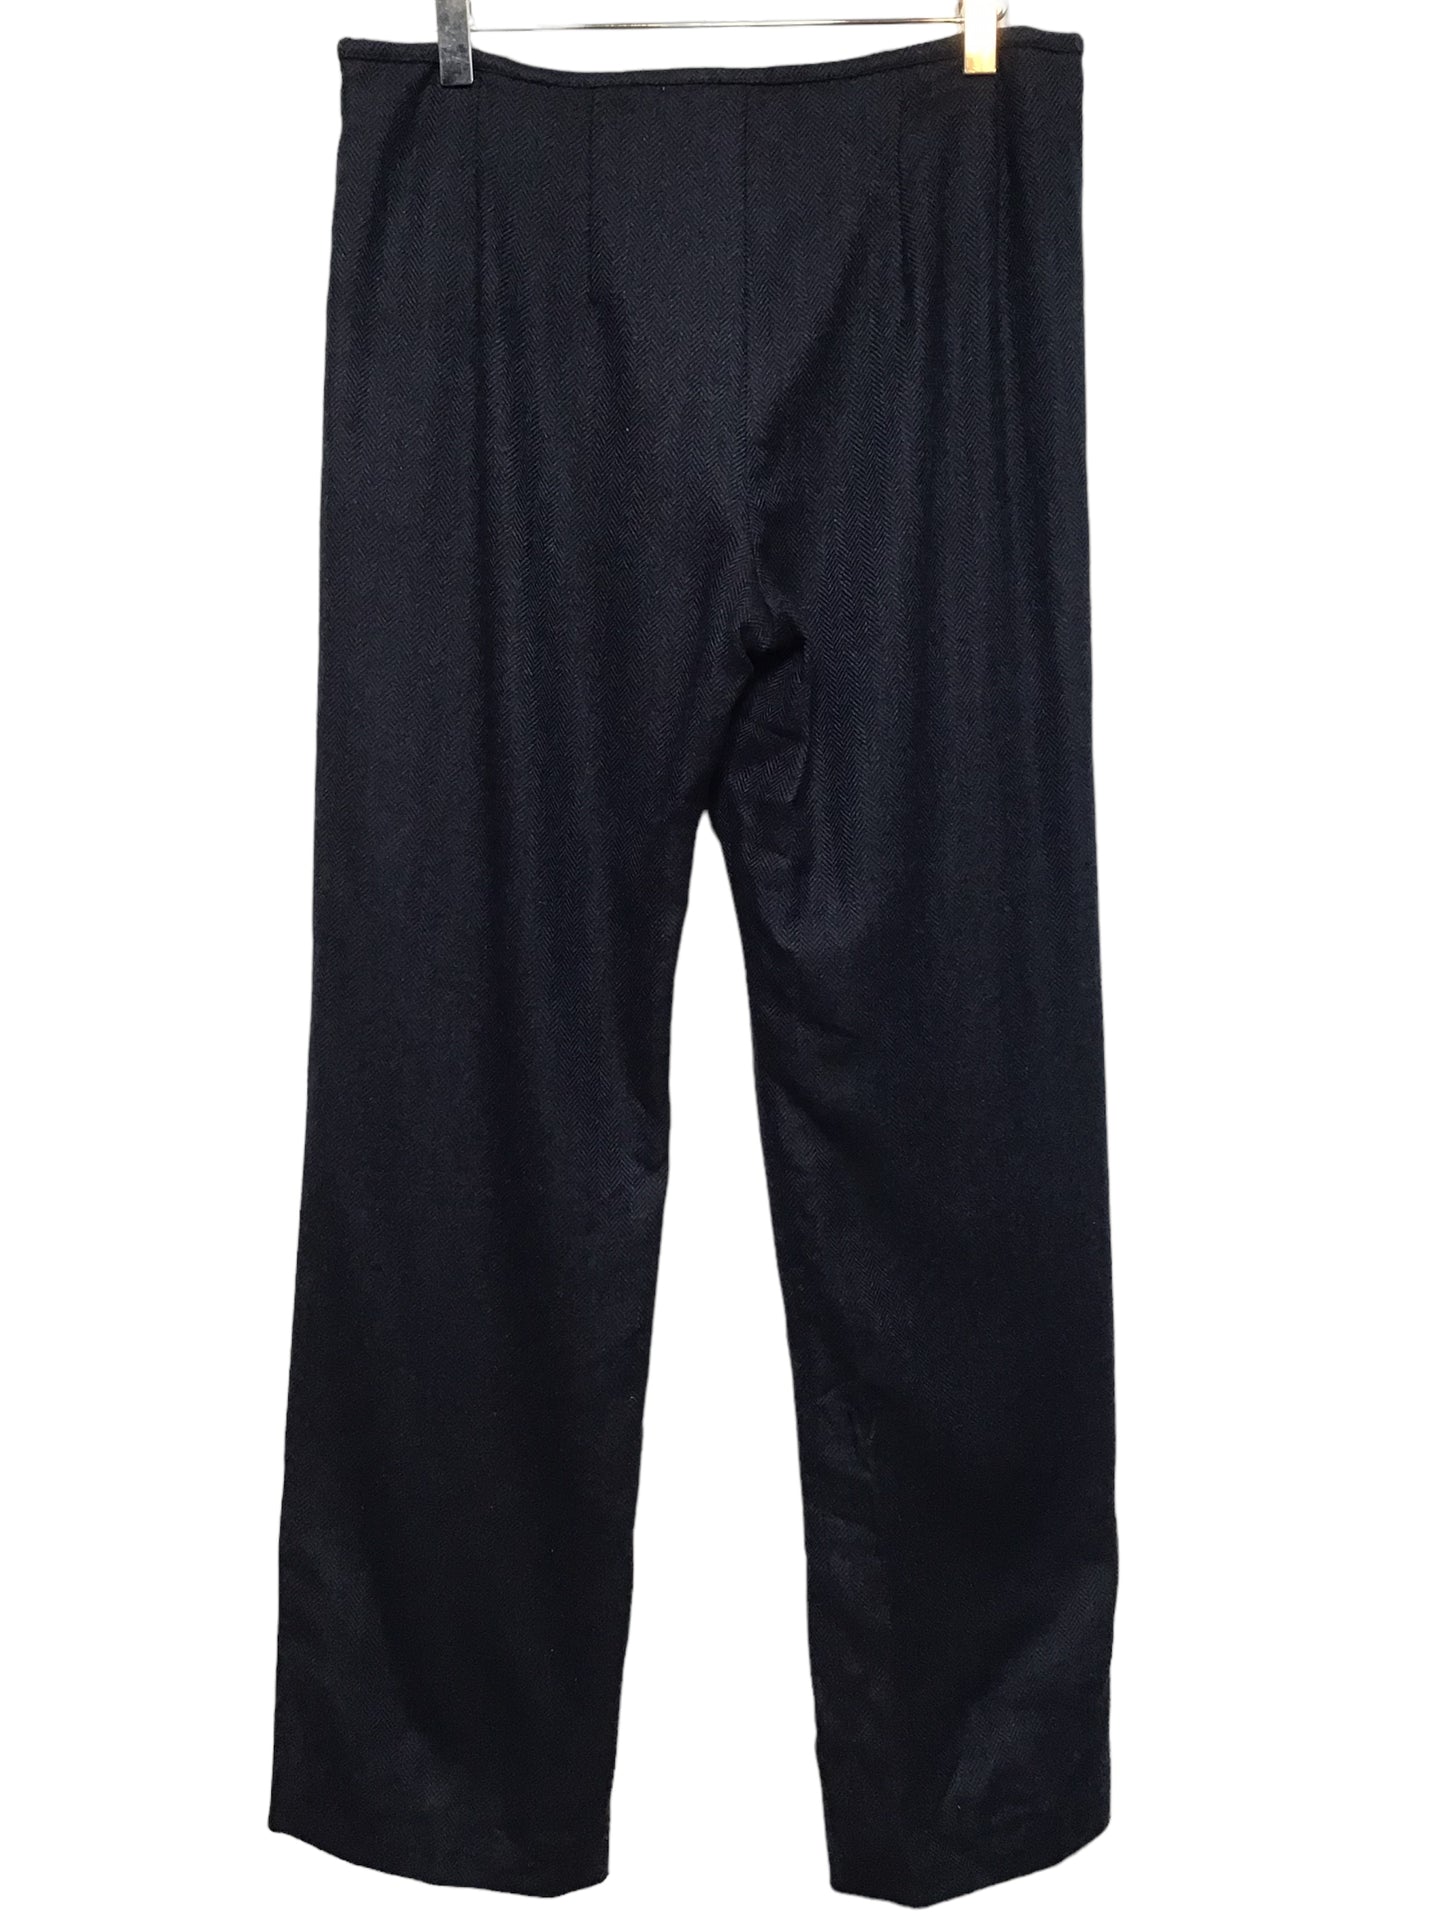 Silvia Pacella Woollen Trousers (Size L)